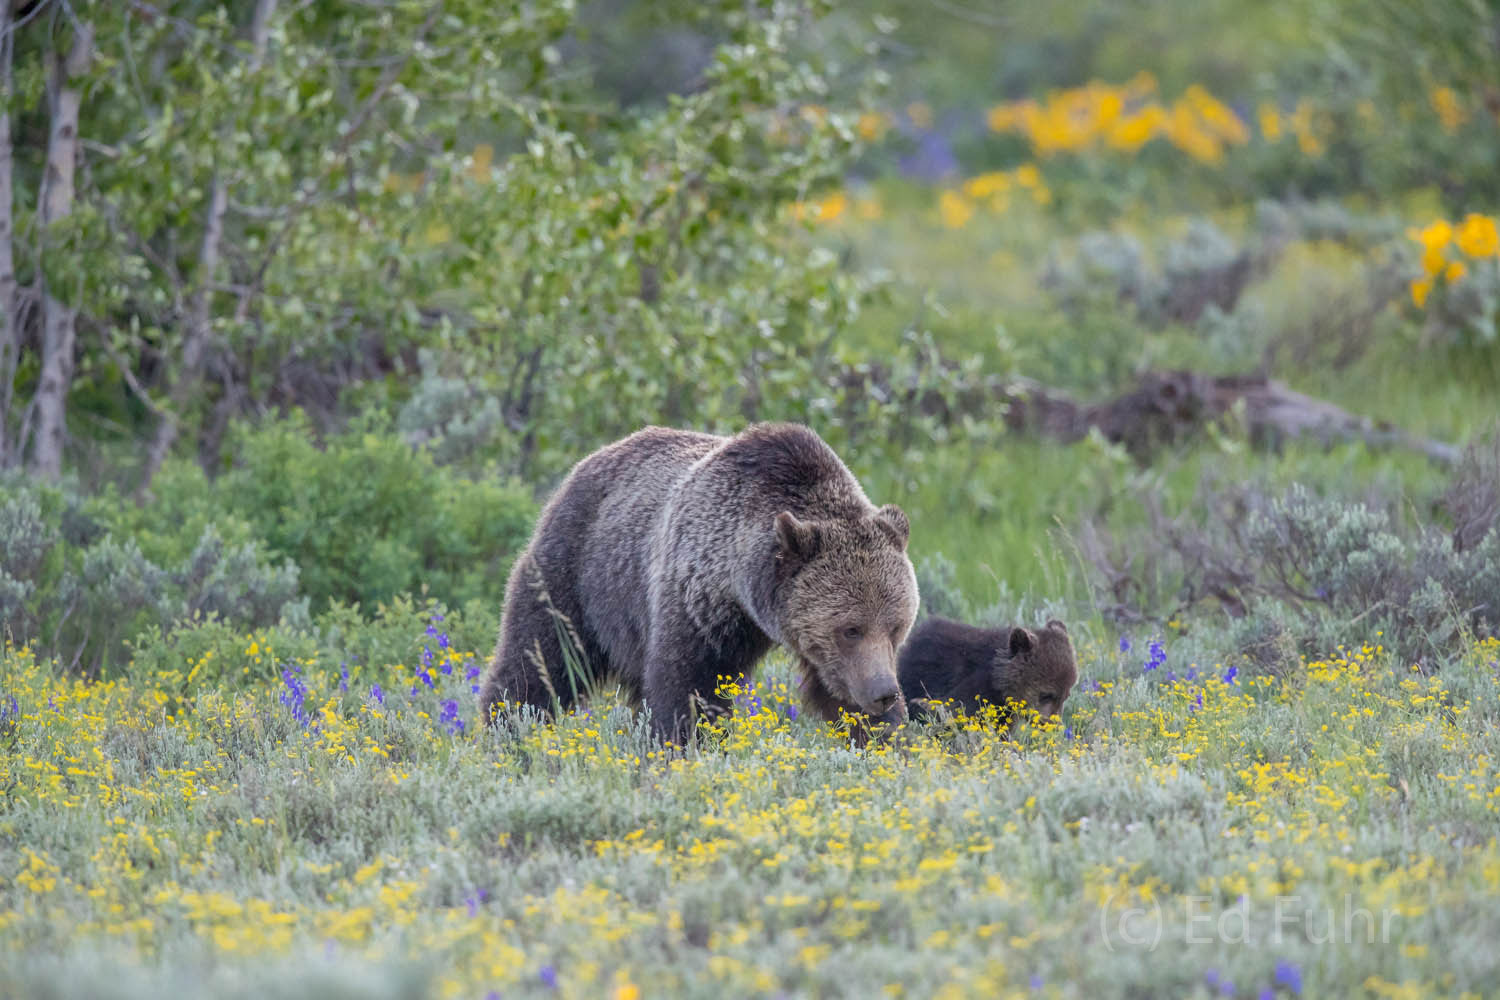 Blondie and one of her two grizzly bear cubs forage for food on June morning in Grand Teton National Park.